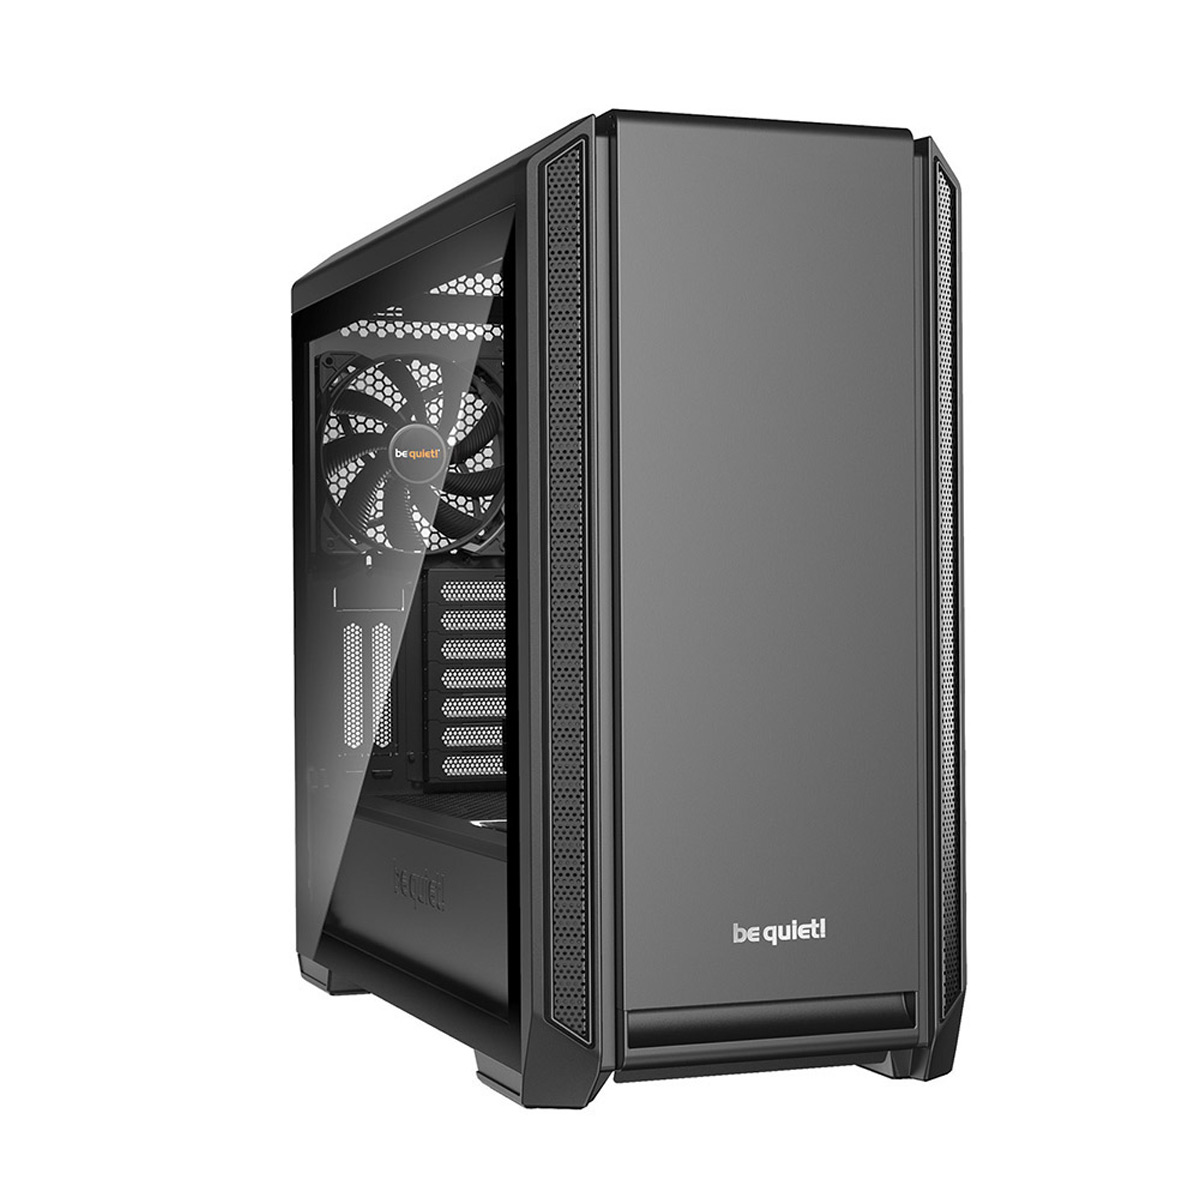 B Grade be quiet Silent Base 601 Midi-Tower Case - Black Tempered Glass